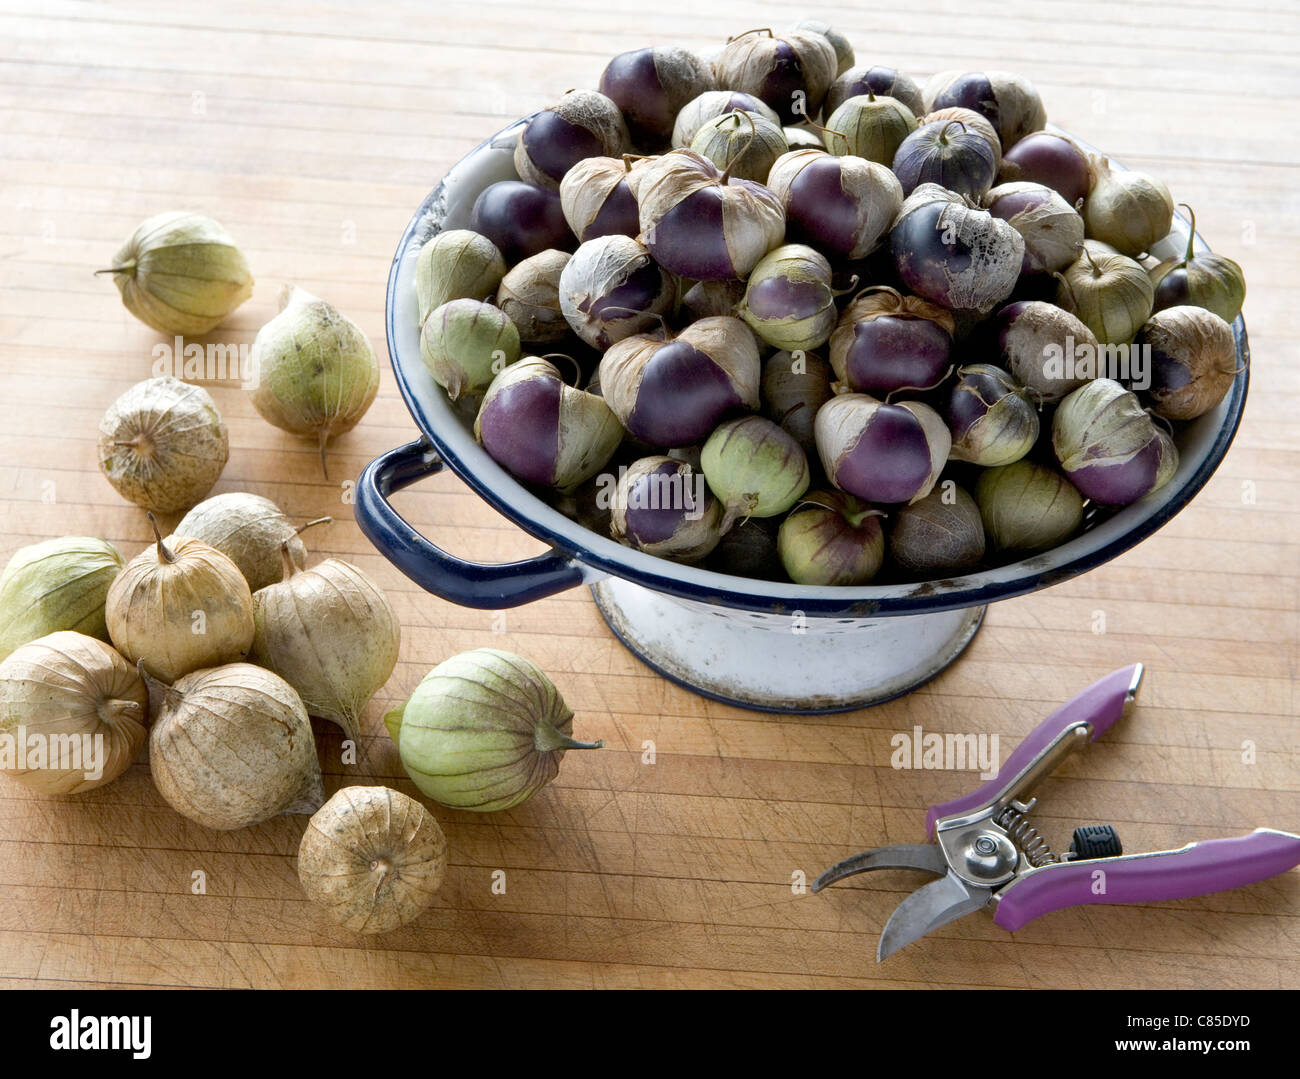 Purple Heirloom tomatillos in an old metal collander. Physalis philadelphica is a plant of the nightshade family. Stock Photo